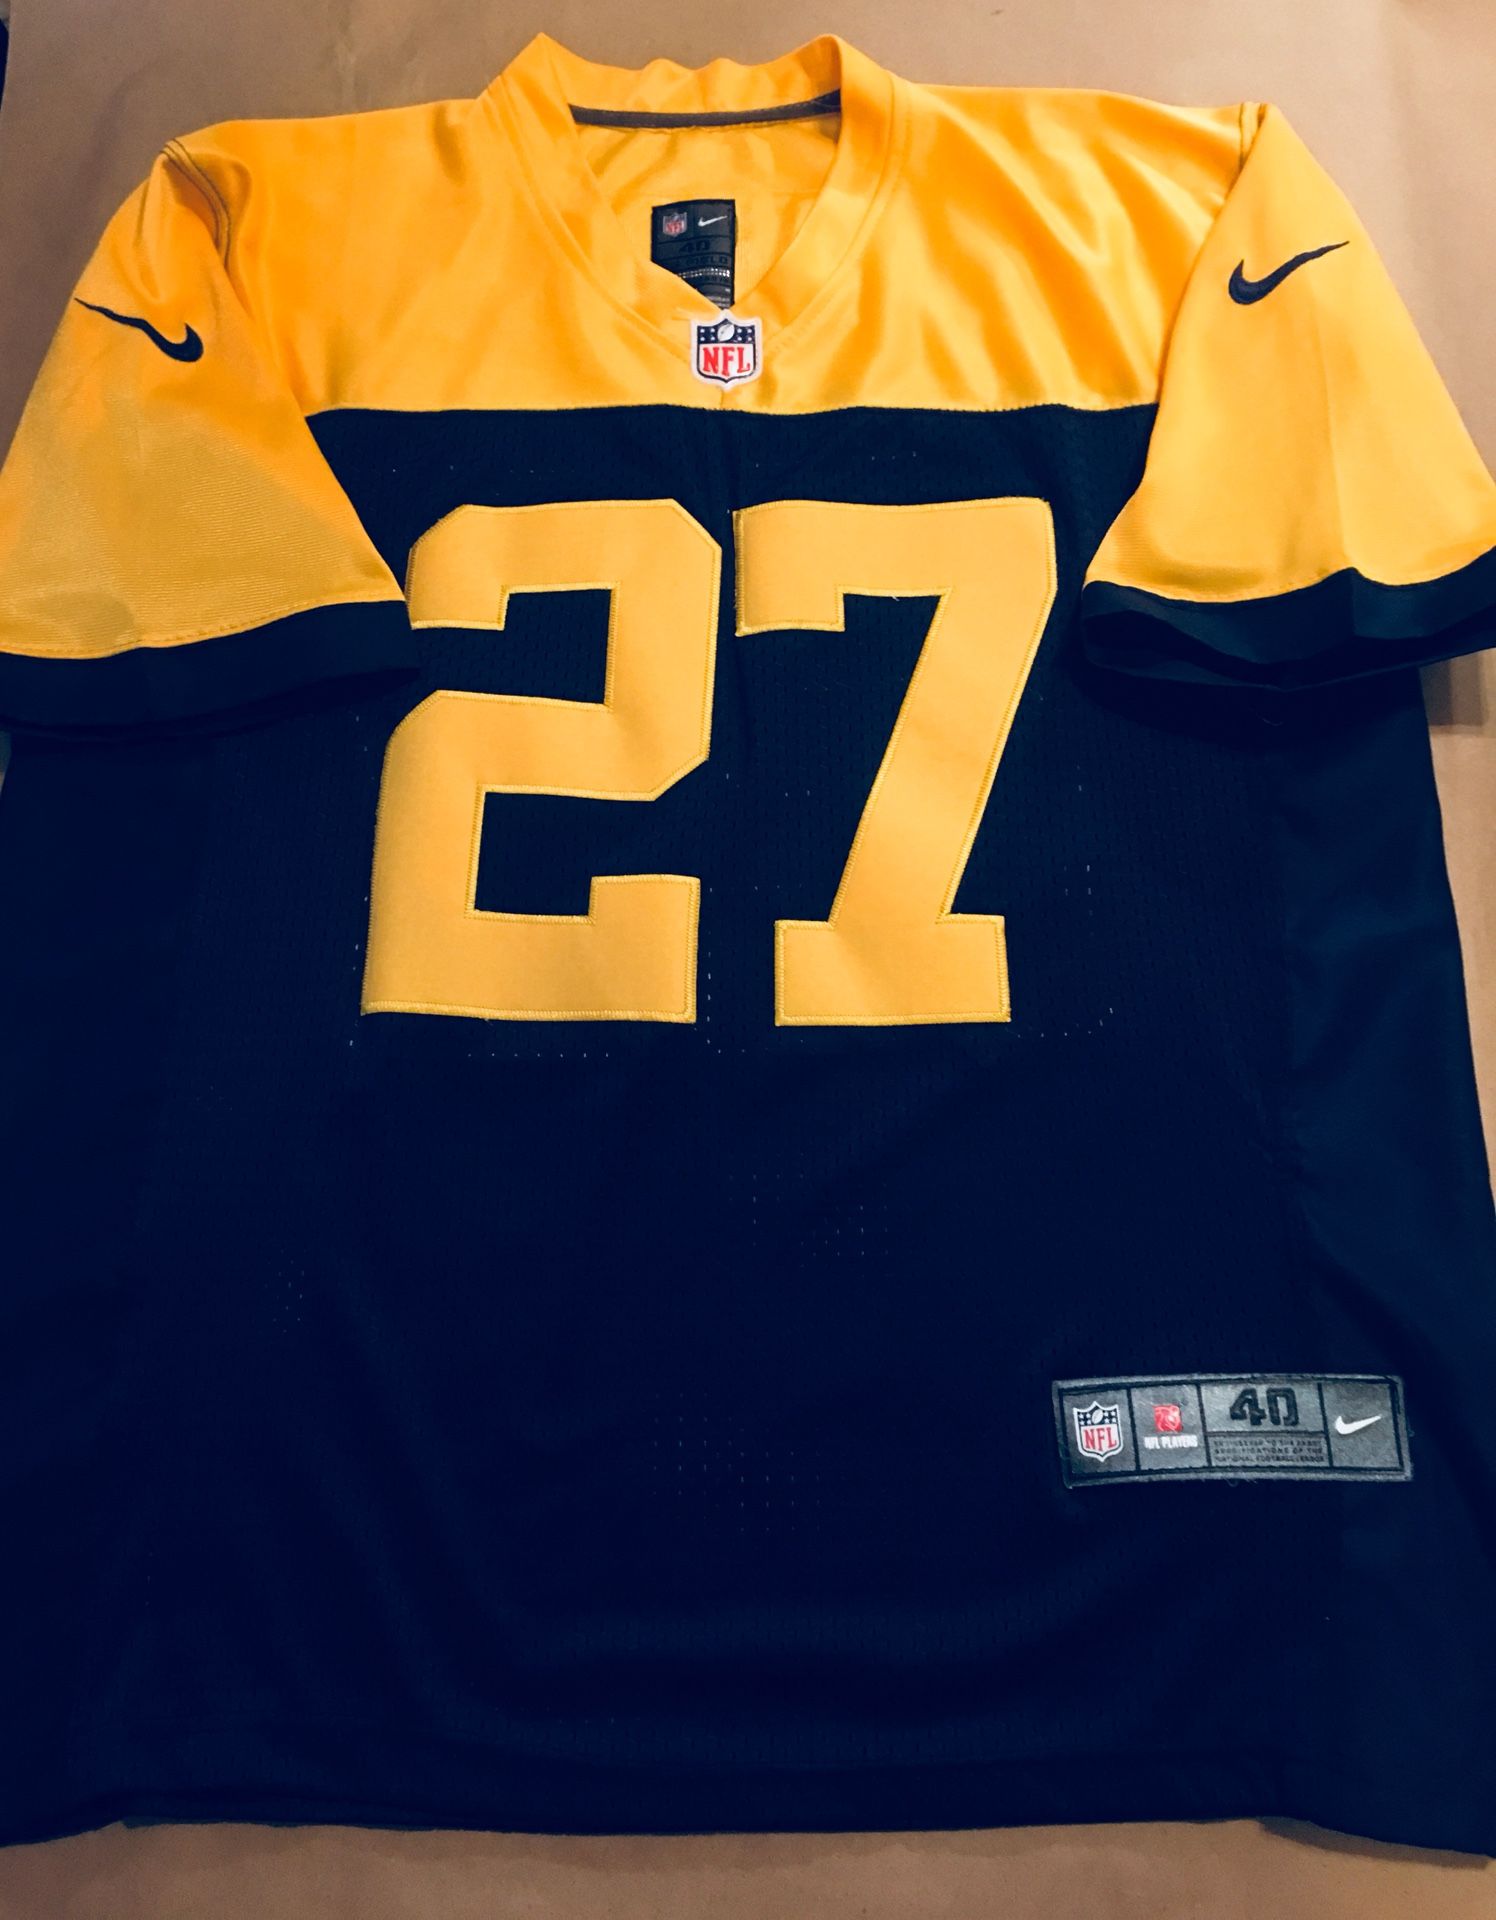 Authentic Nike NFL Green Bay Packers ACME Throwback Jersey #27 Eddie Lacy  Men's size 40/Medium. New w/out tags for Sale in Bell Gardens, CA - OfferUp